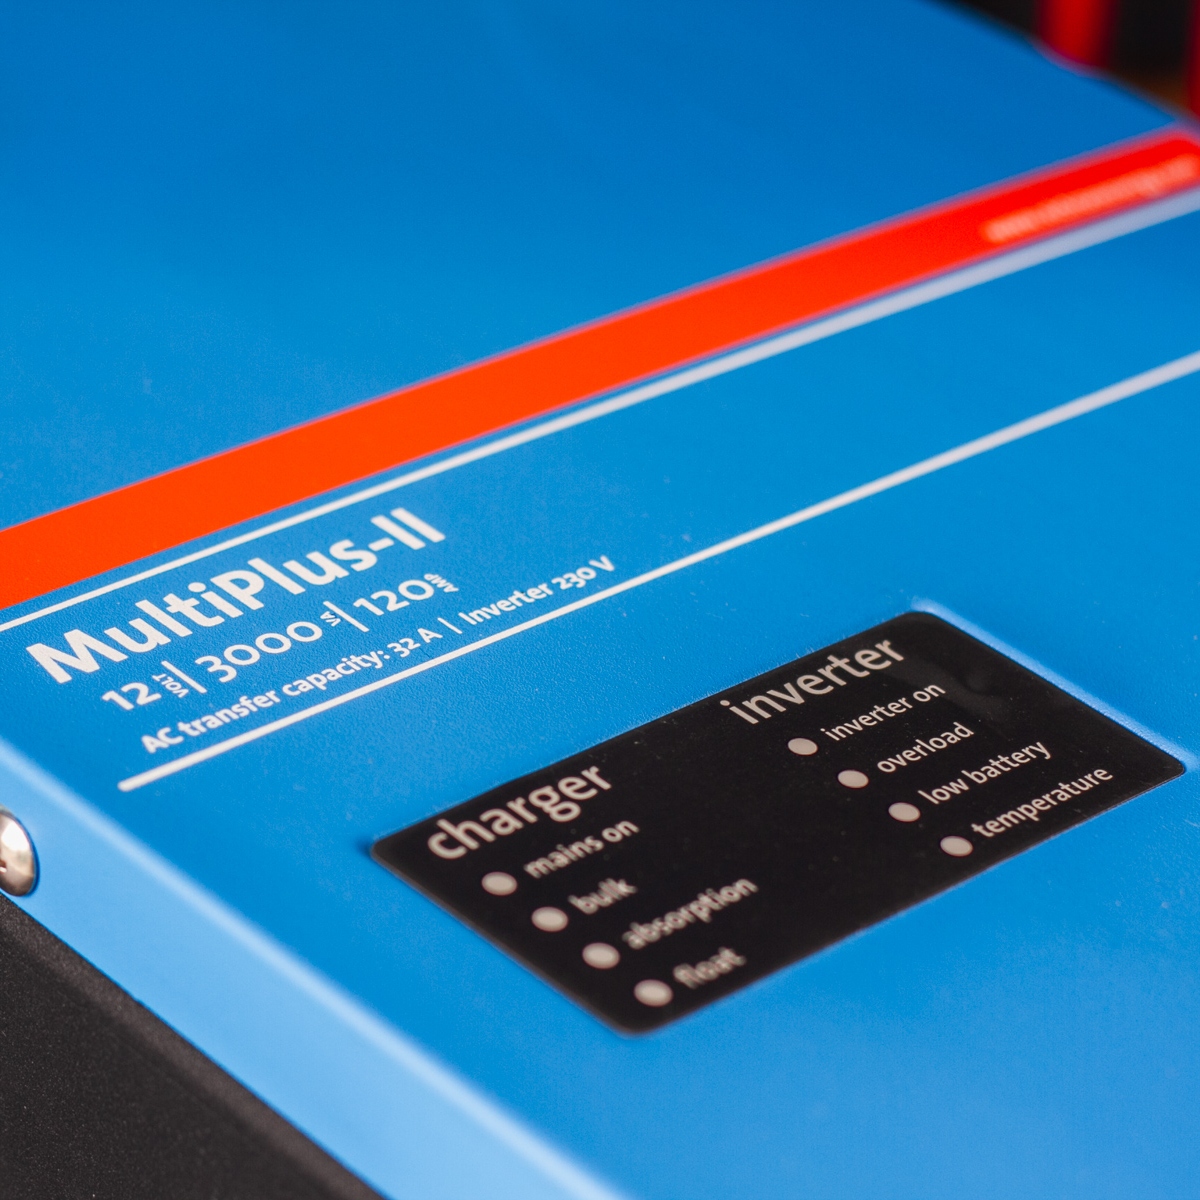 Close-up of a blue and red Victron MultiPlus 3000VA 12V Inverter/Charger, showcasing indicators for charger and inverter status.